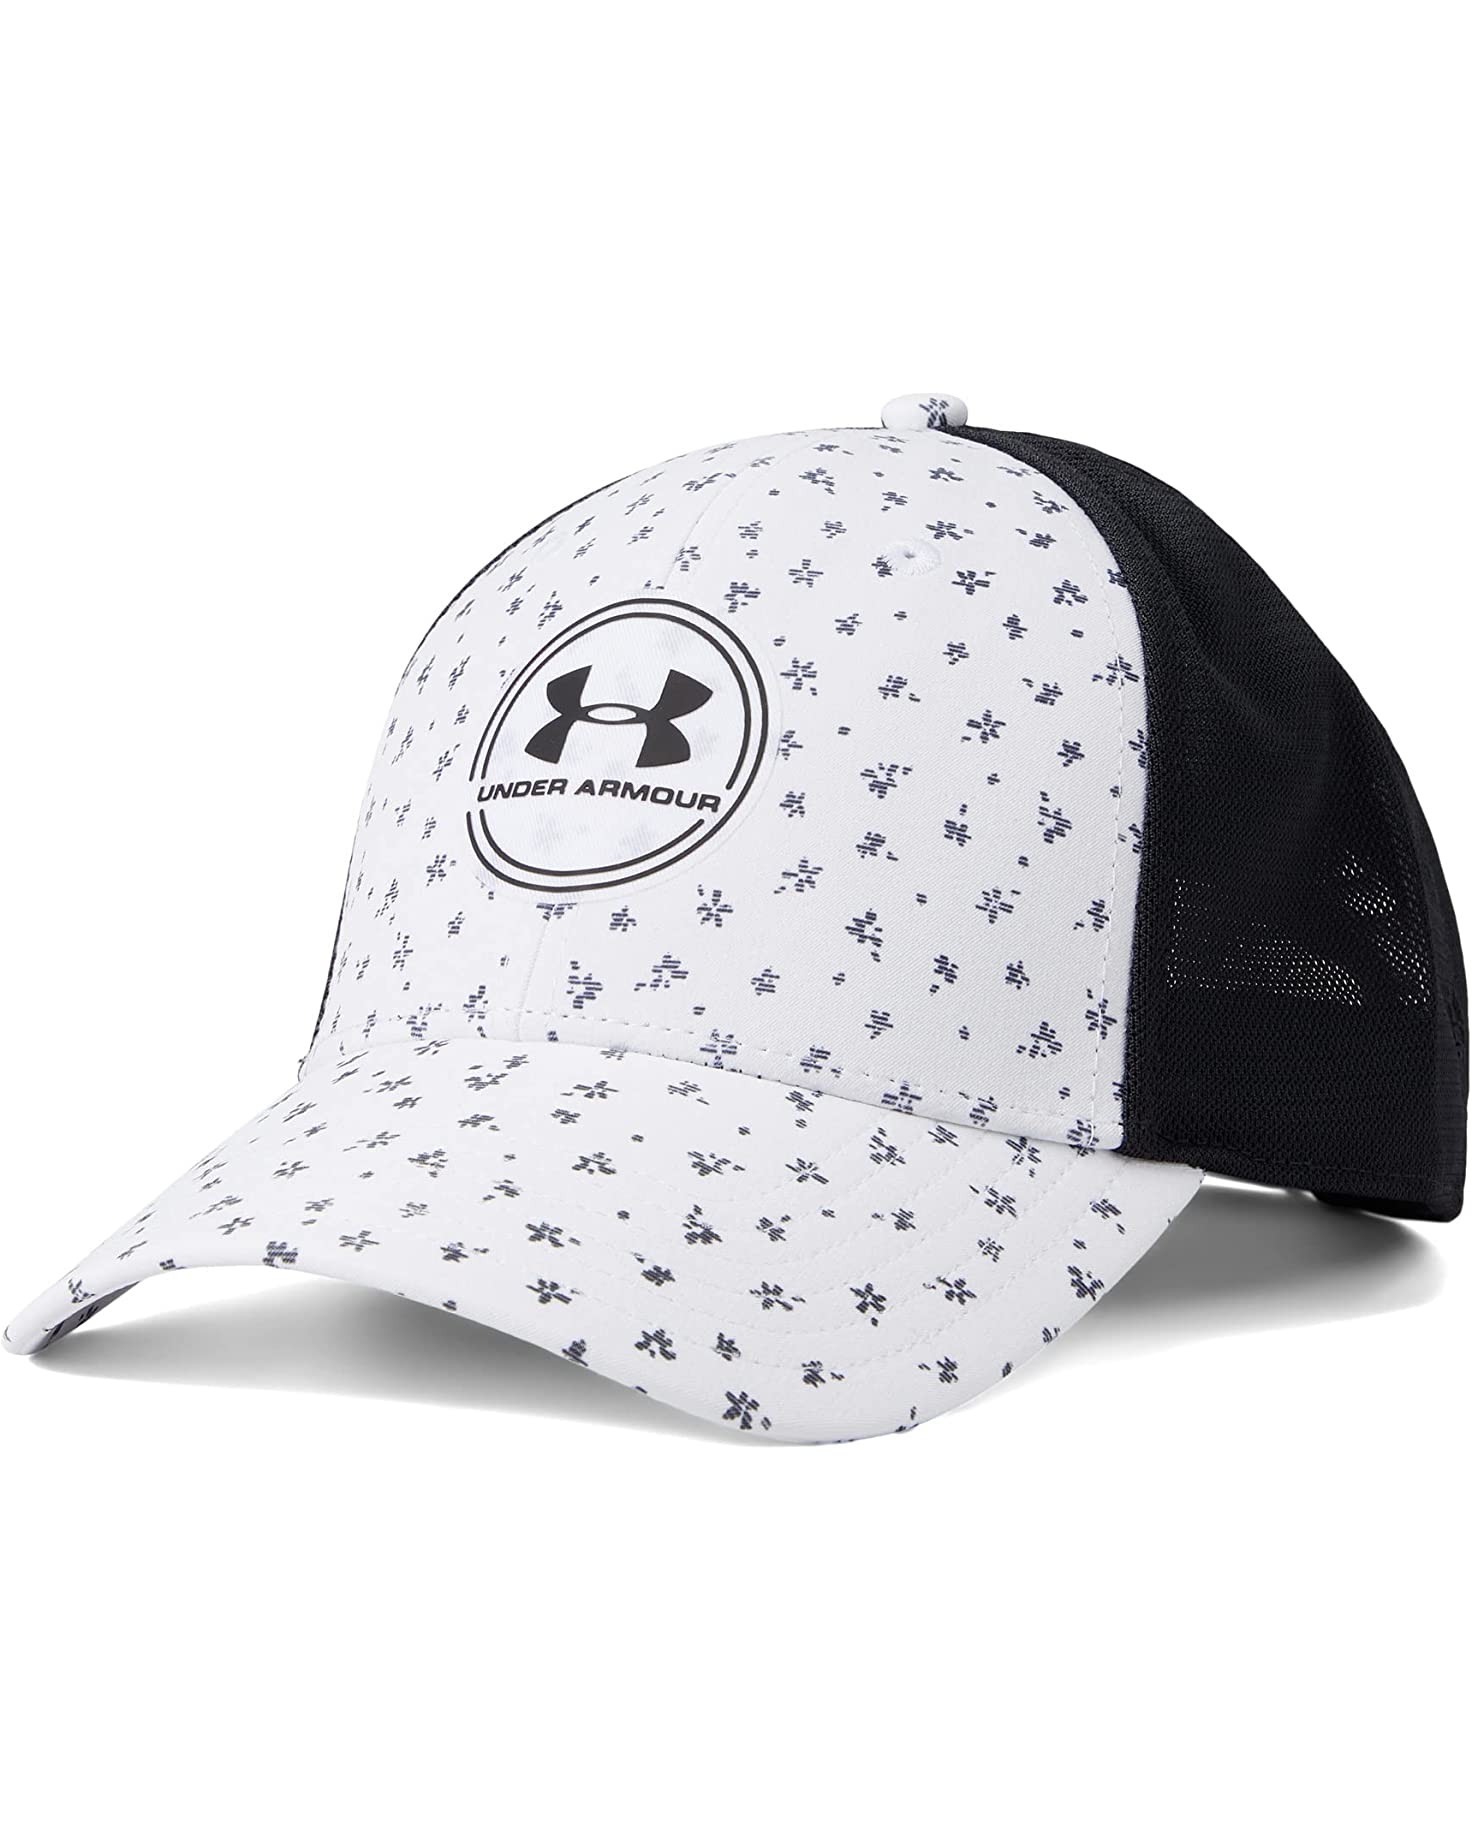 Under Armour Men's or Women's Iso-Chill Driver Mesh Adjustable Cap (White/Black) $11.74 + Free Shipping